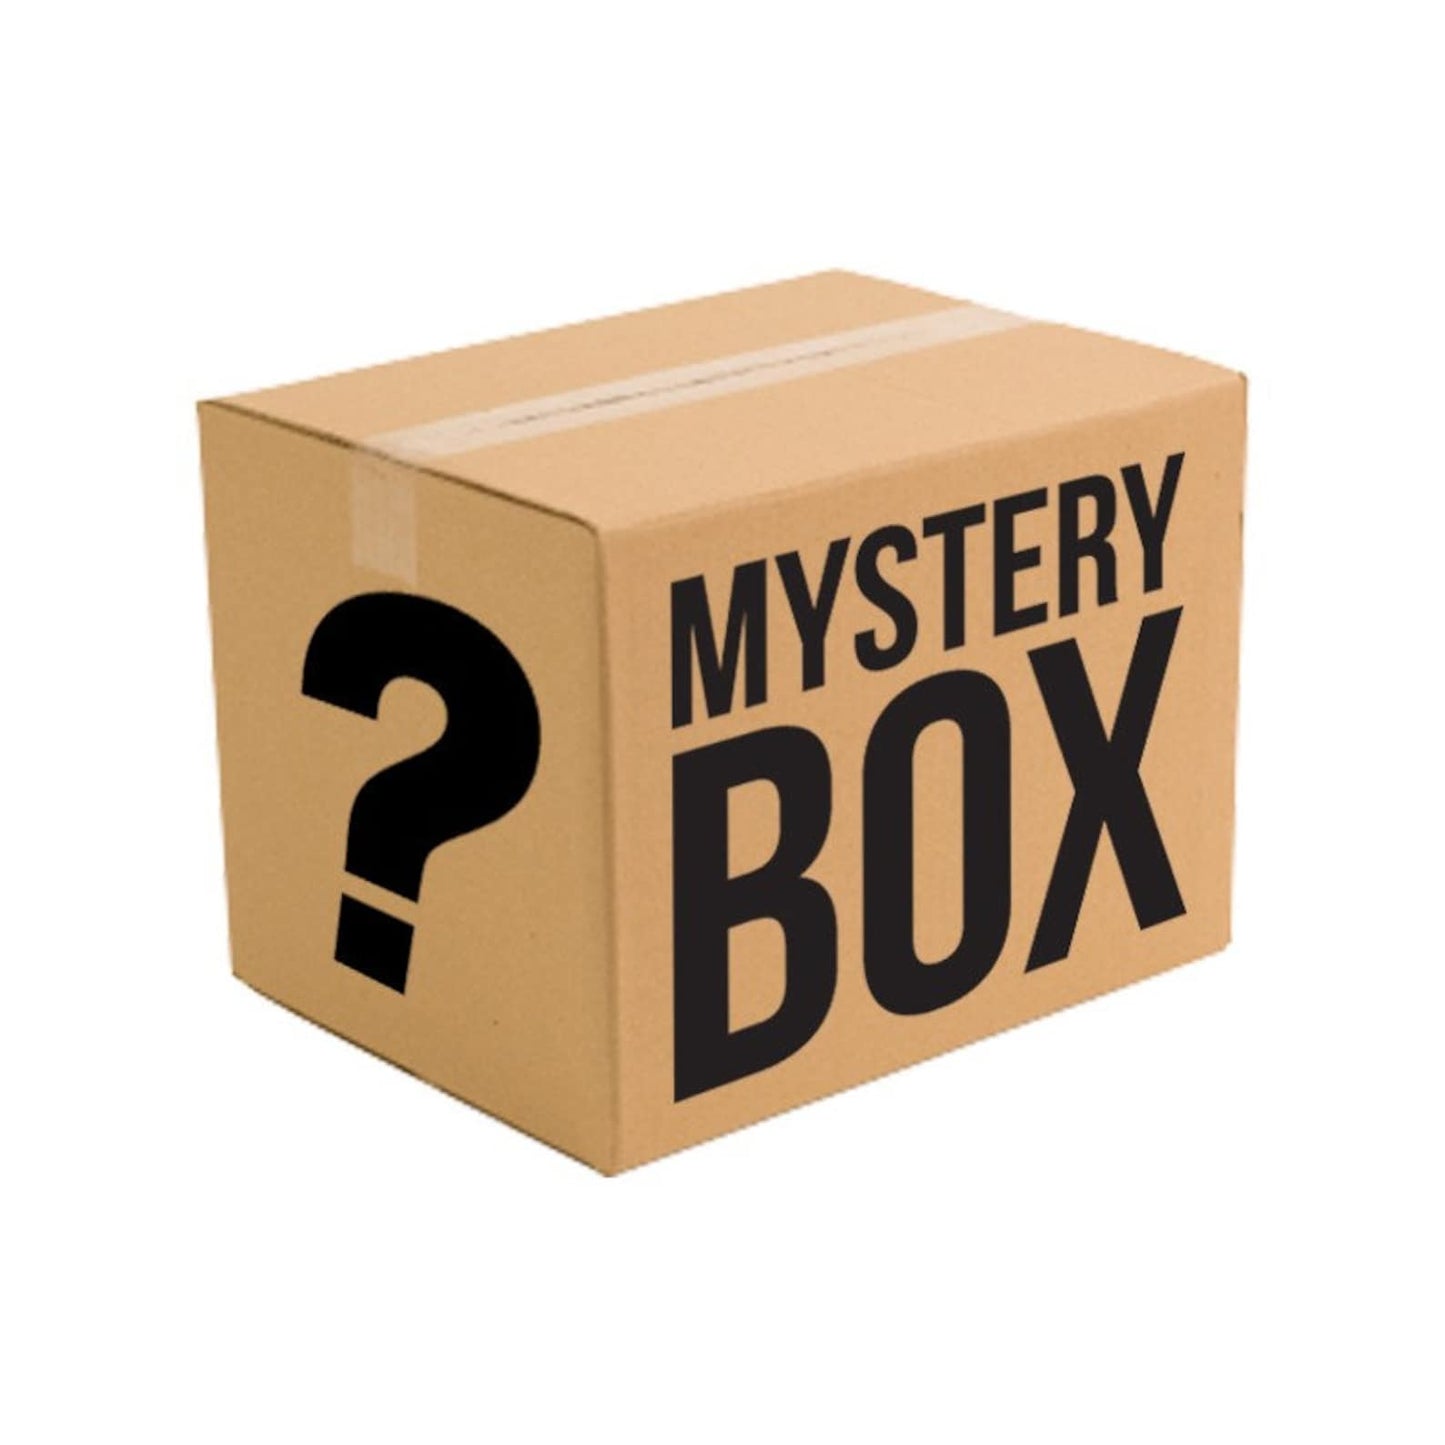 Prime x Mr Beast Mystery Box Large Size